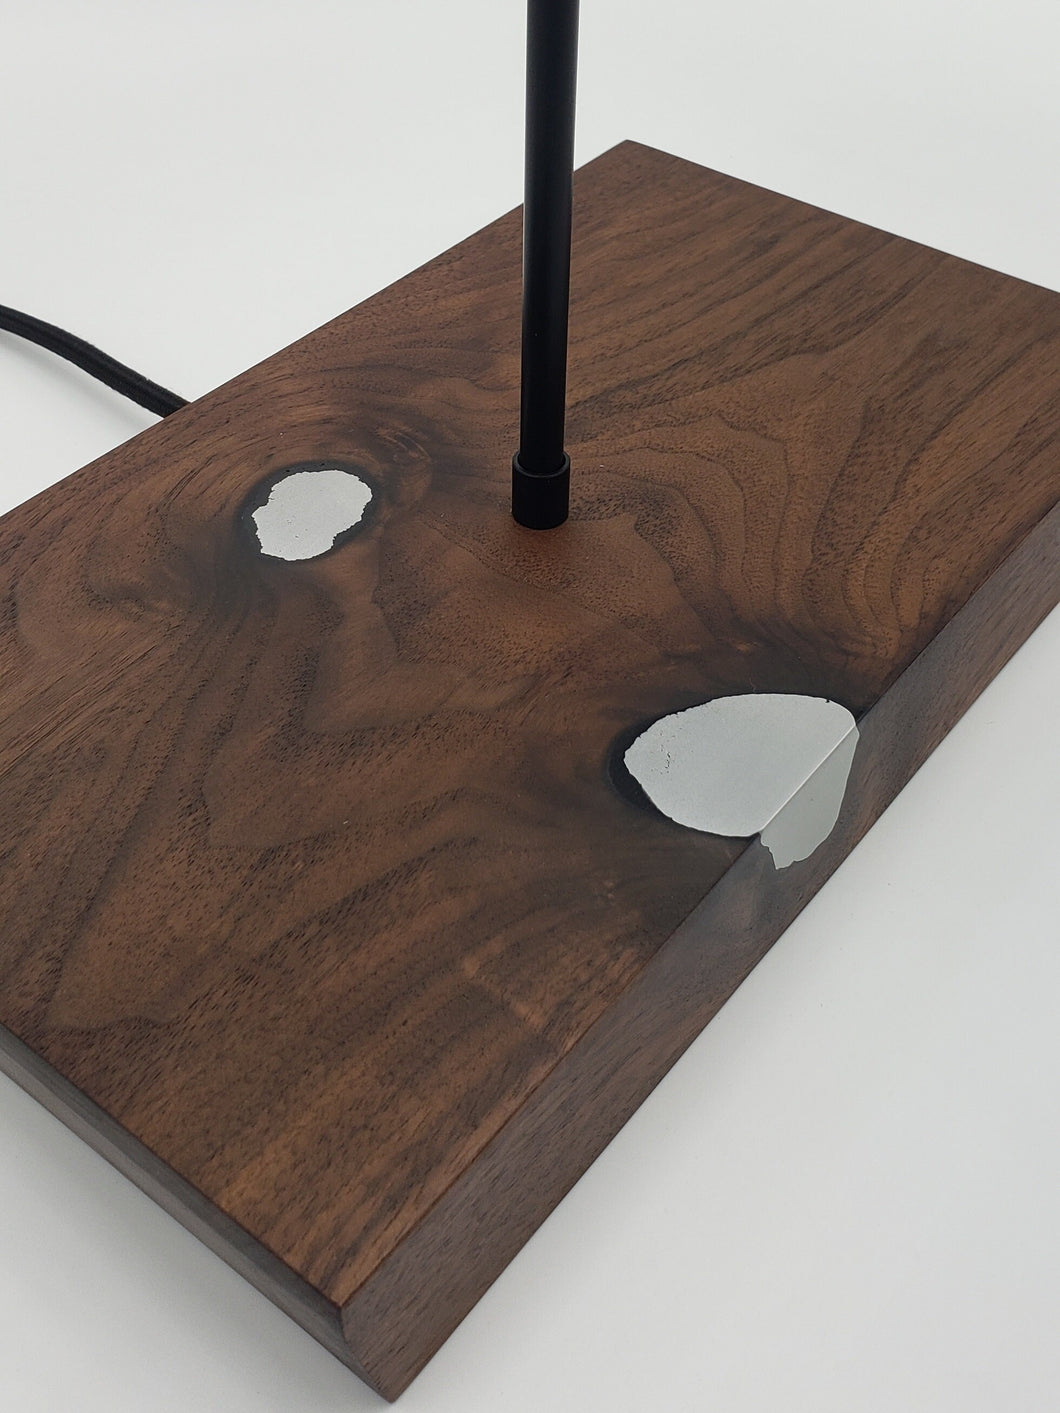 Modern Minimalist Walnut Table Lamp with Poured Metal Inlay/Modern Rustic Desk Lamp/Handcrafted One of a Kind Lamp